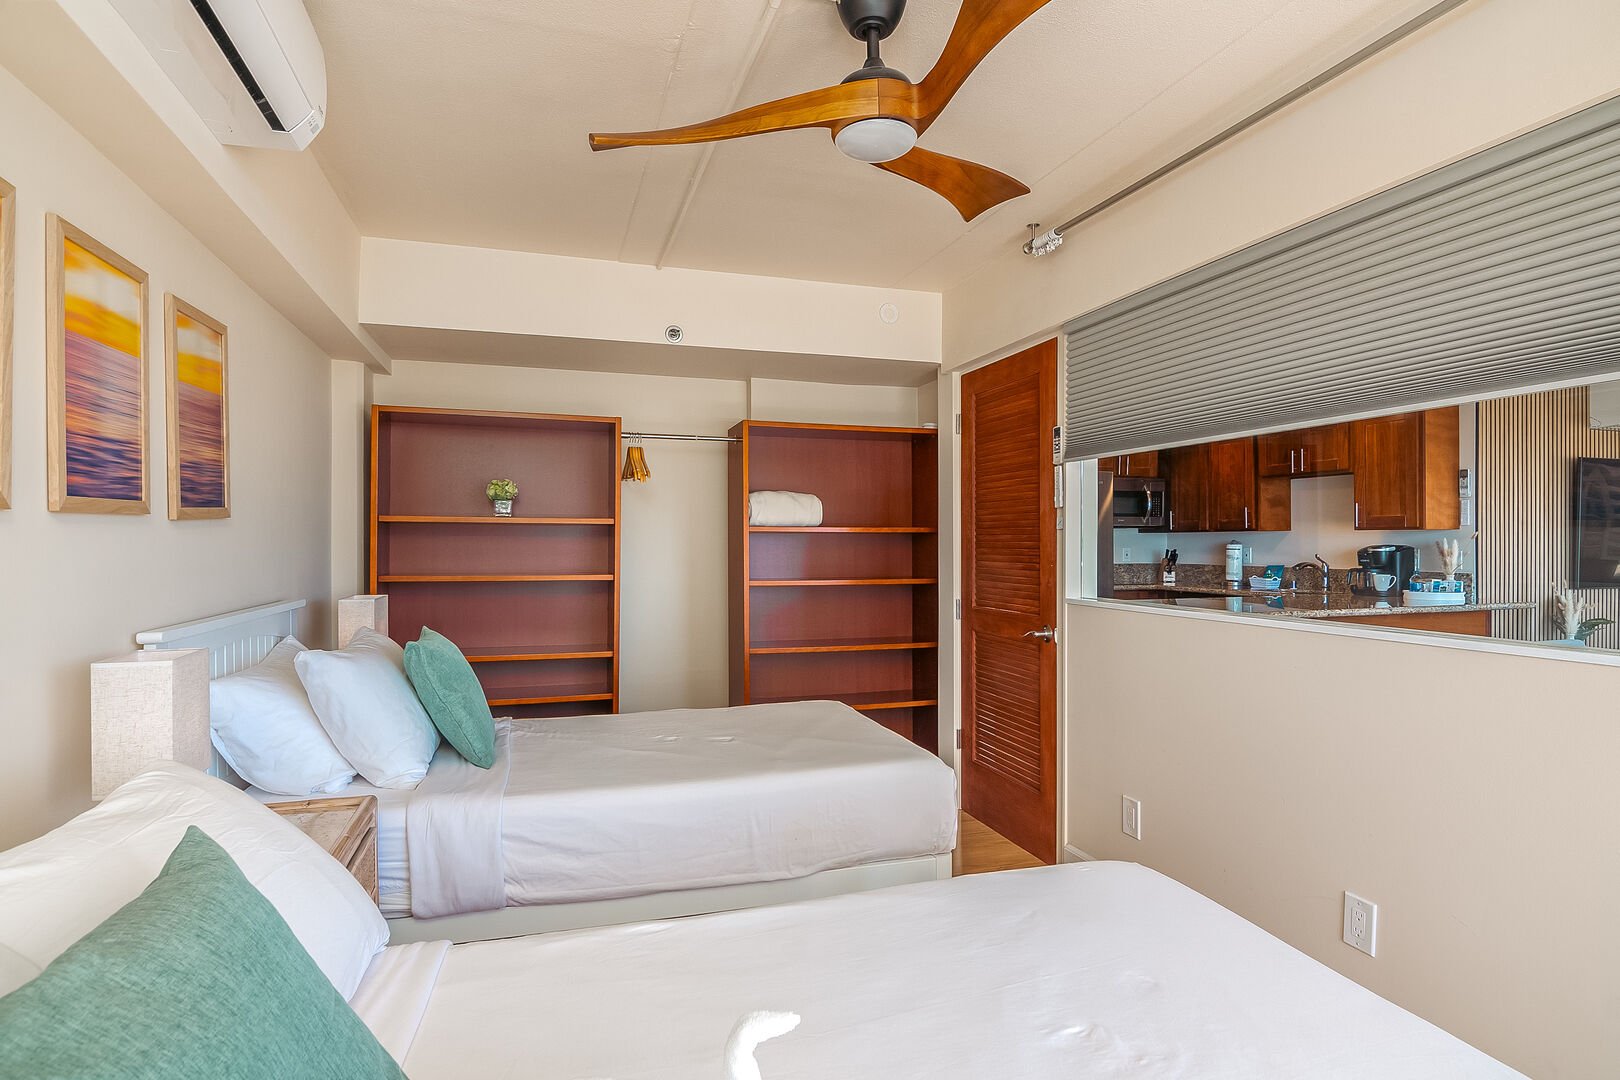 The second bedroom with cabinets and a ceiling fan, motorized window blinds offers the option of having privacy or connecting the room and view to the rest of the living space.